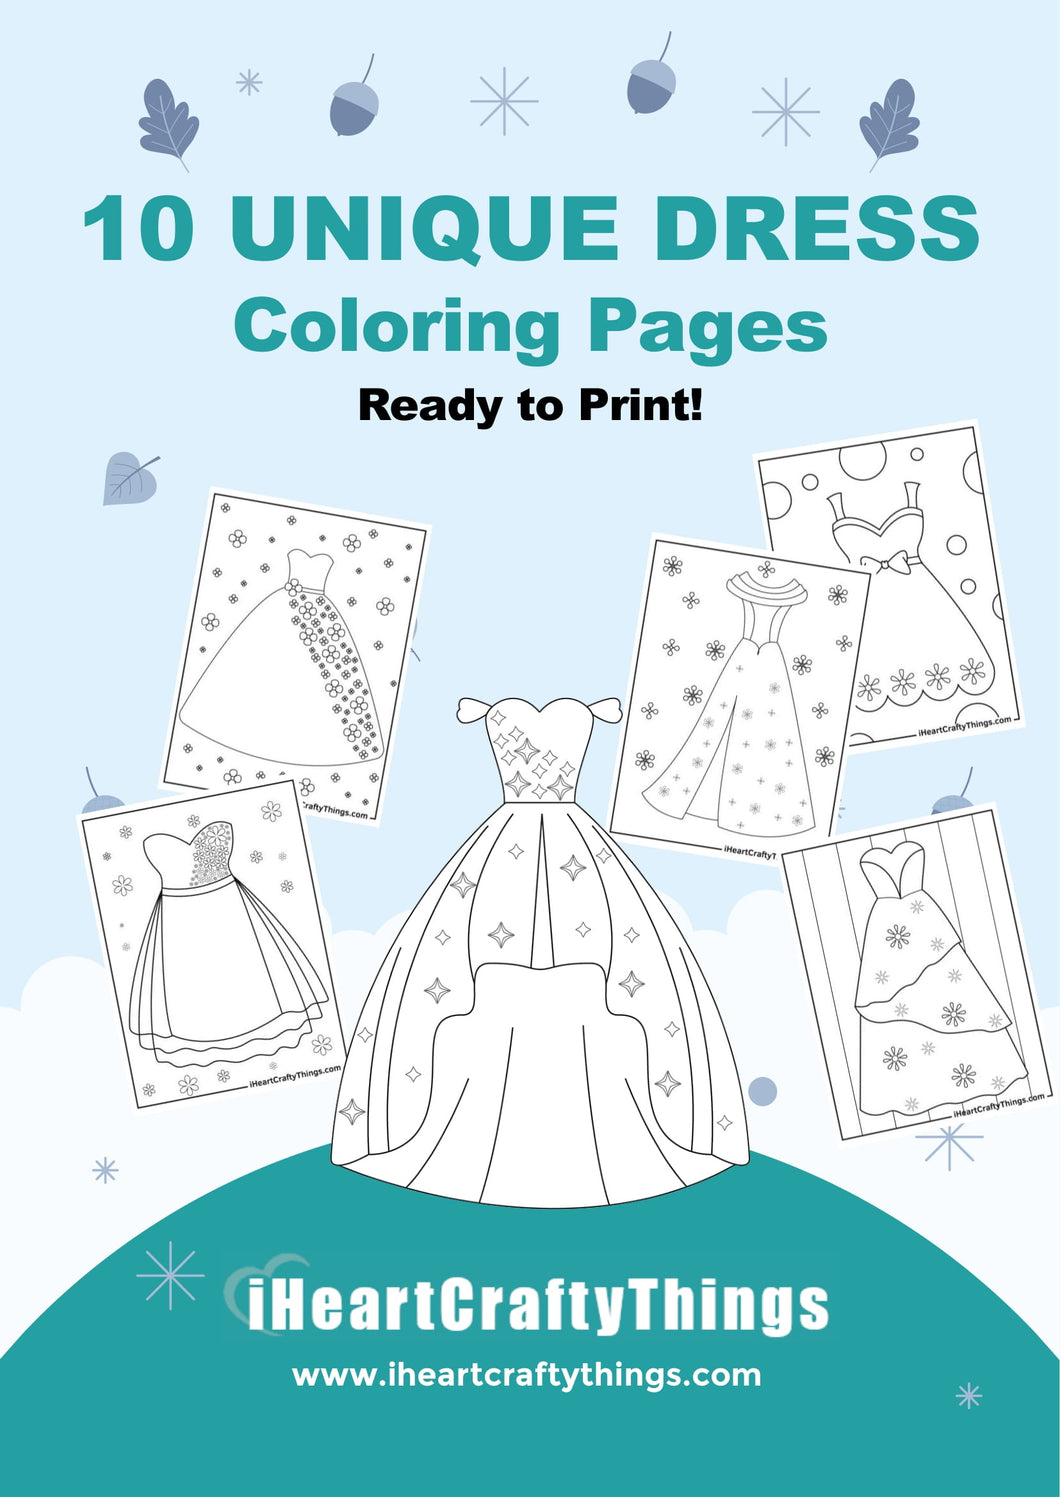 10 LOVELY DRESS COLORING PAGES